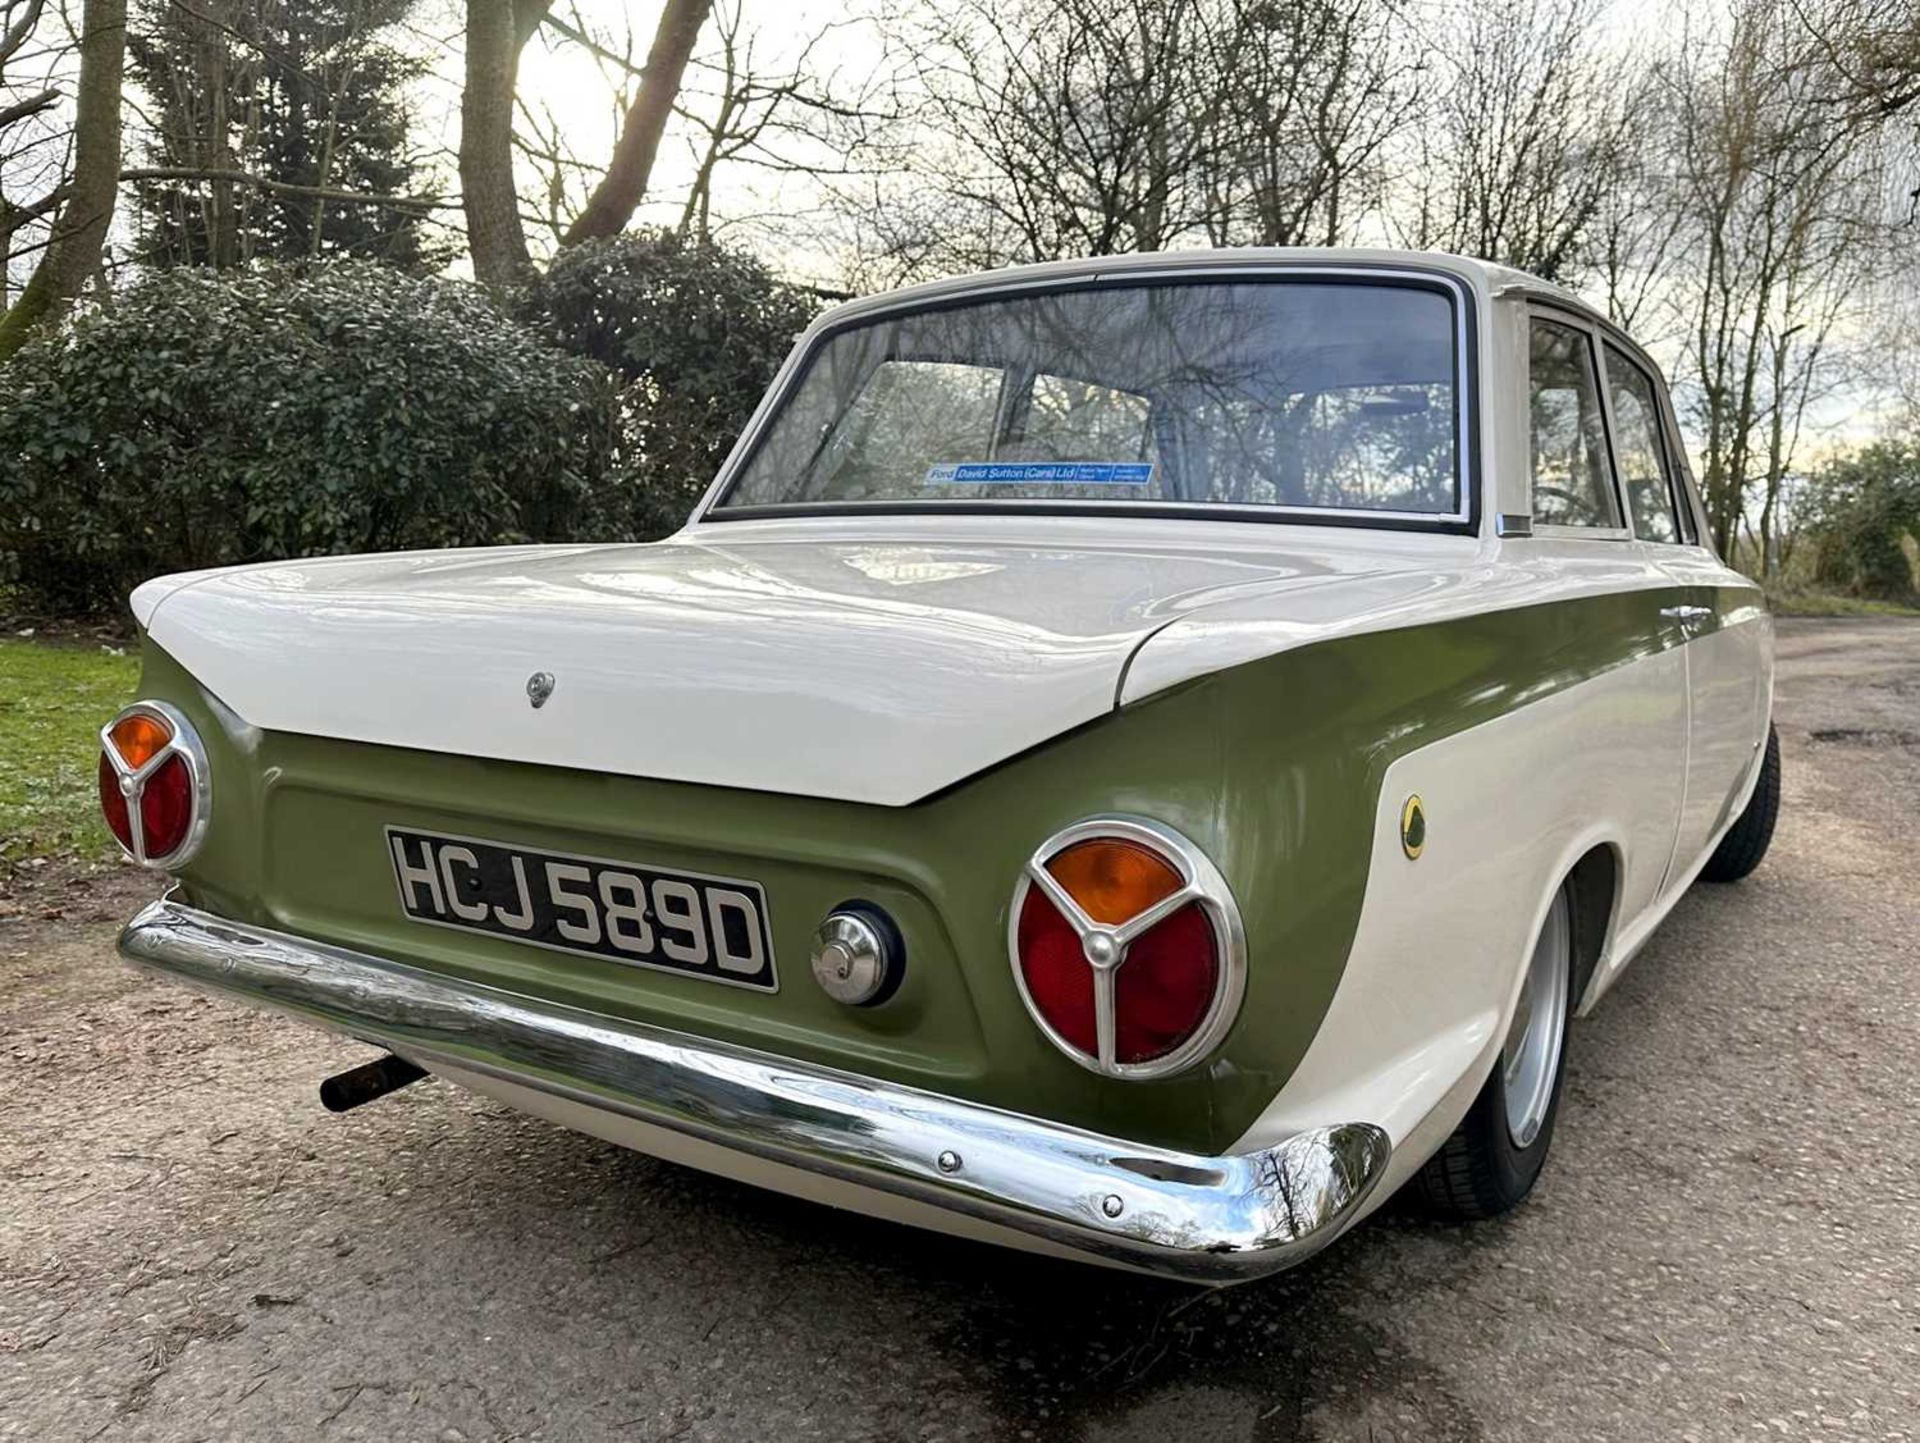 1963 Ford Lotus Cortina Pre-Aeroflow model, fitted with A-frame rear suspension - Image 22 of 58